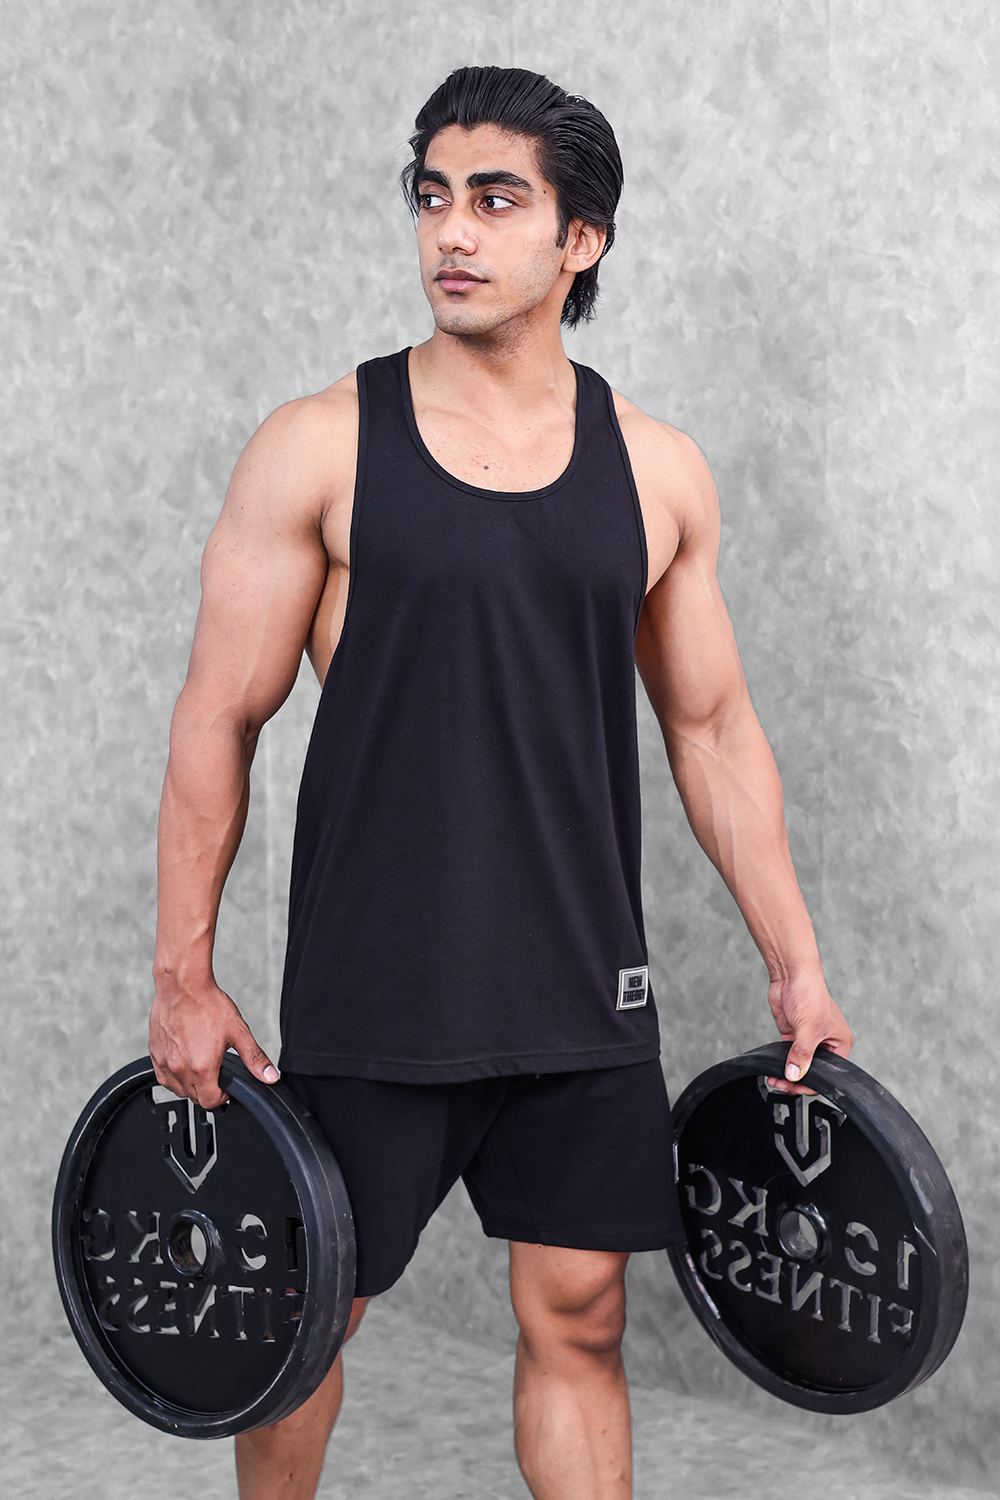 Gymwear T-Shirts For Men  Activewear, Exercise & Workout Clothes